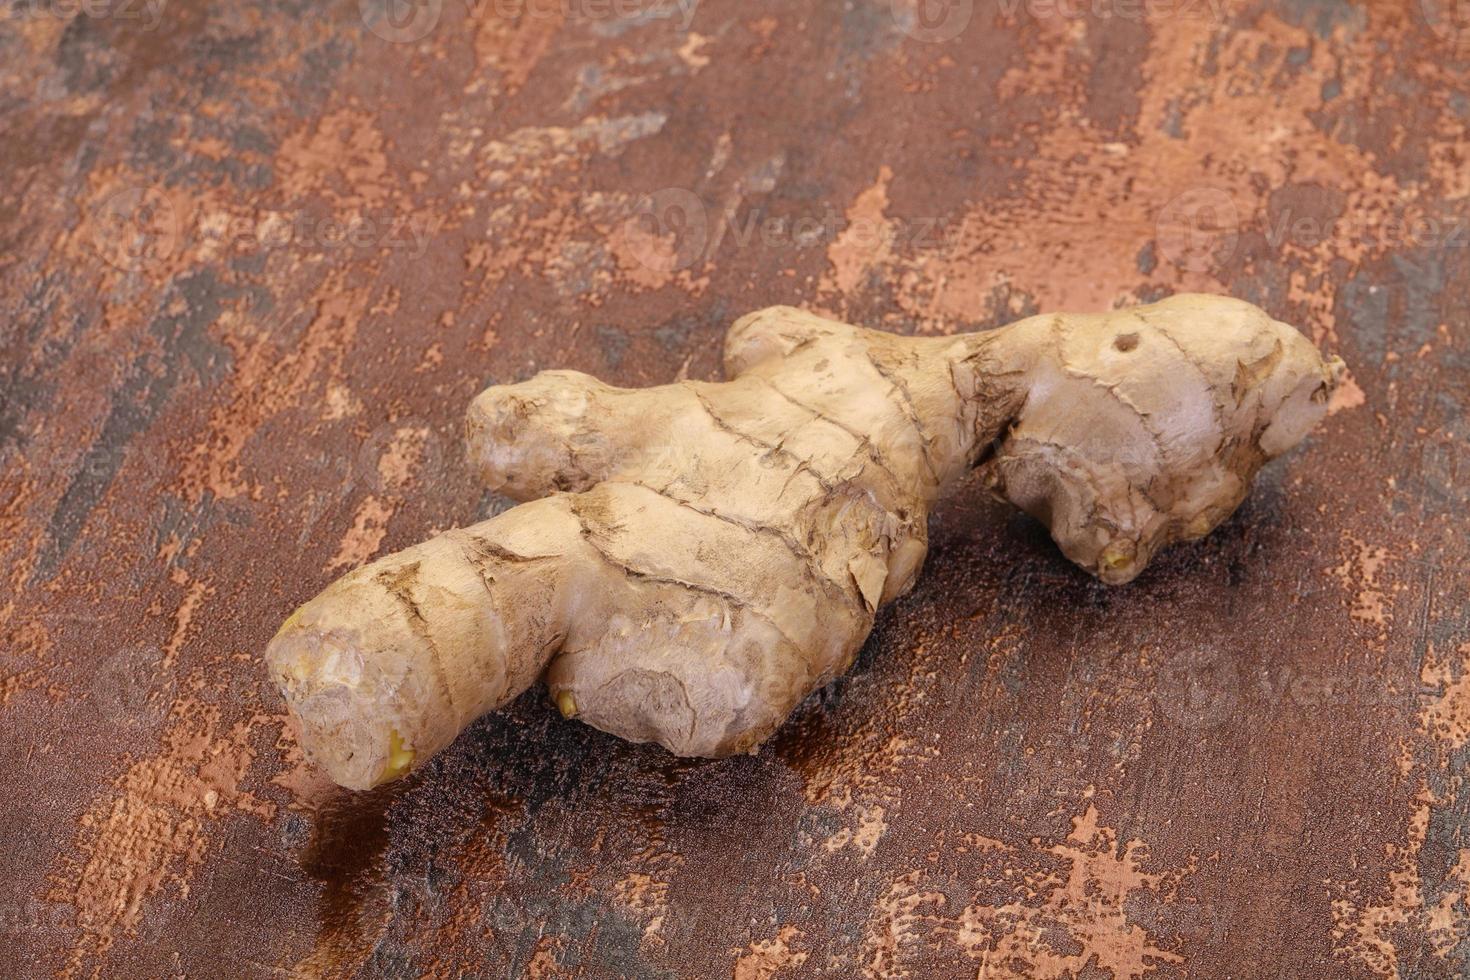 Aroma Ginger root photo